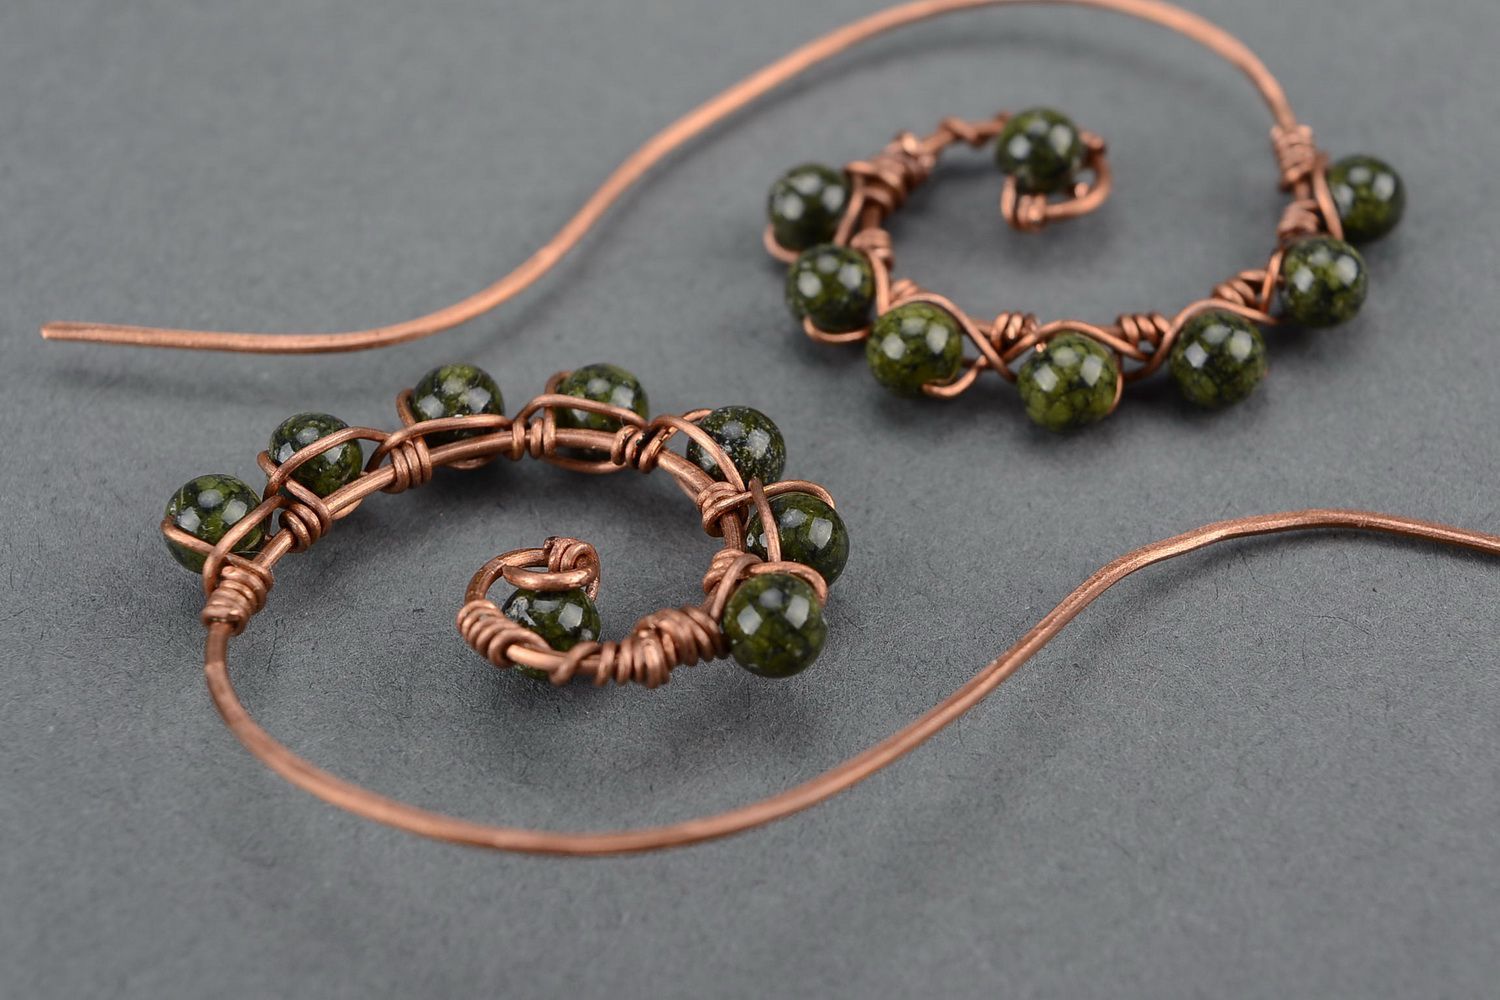 Eaarrings made of copper wire, stone - serpentine photo 3